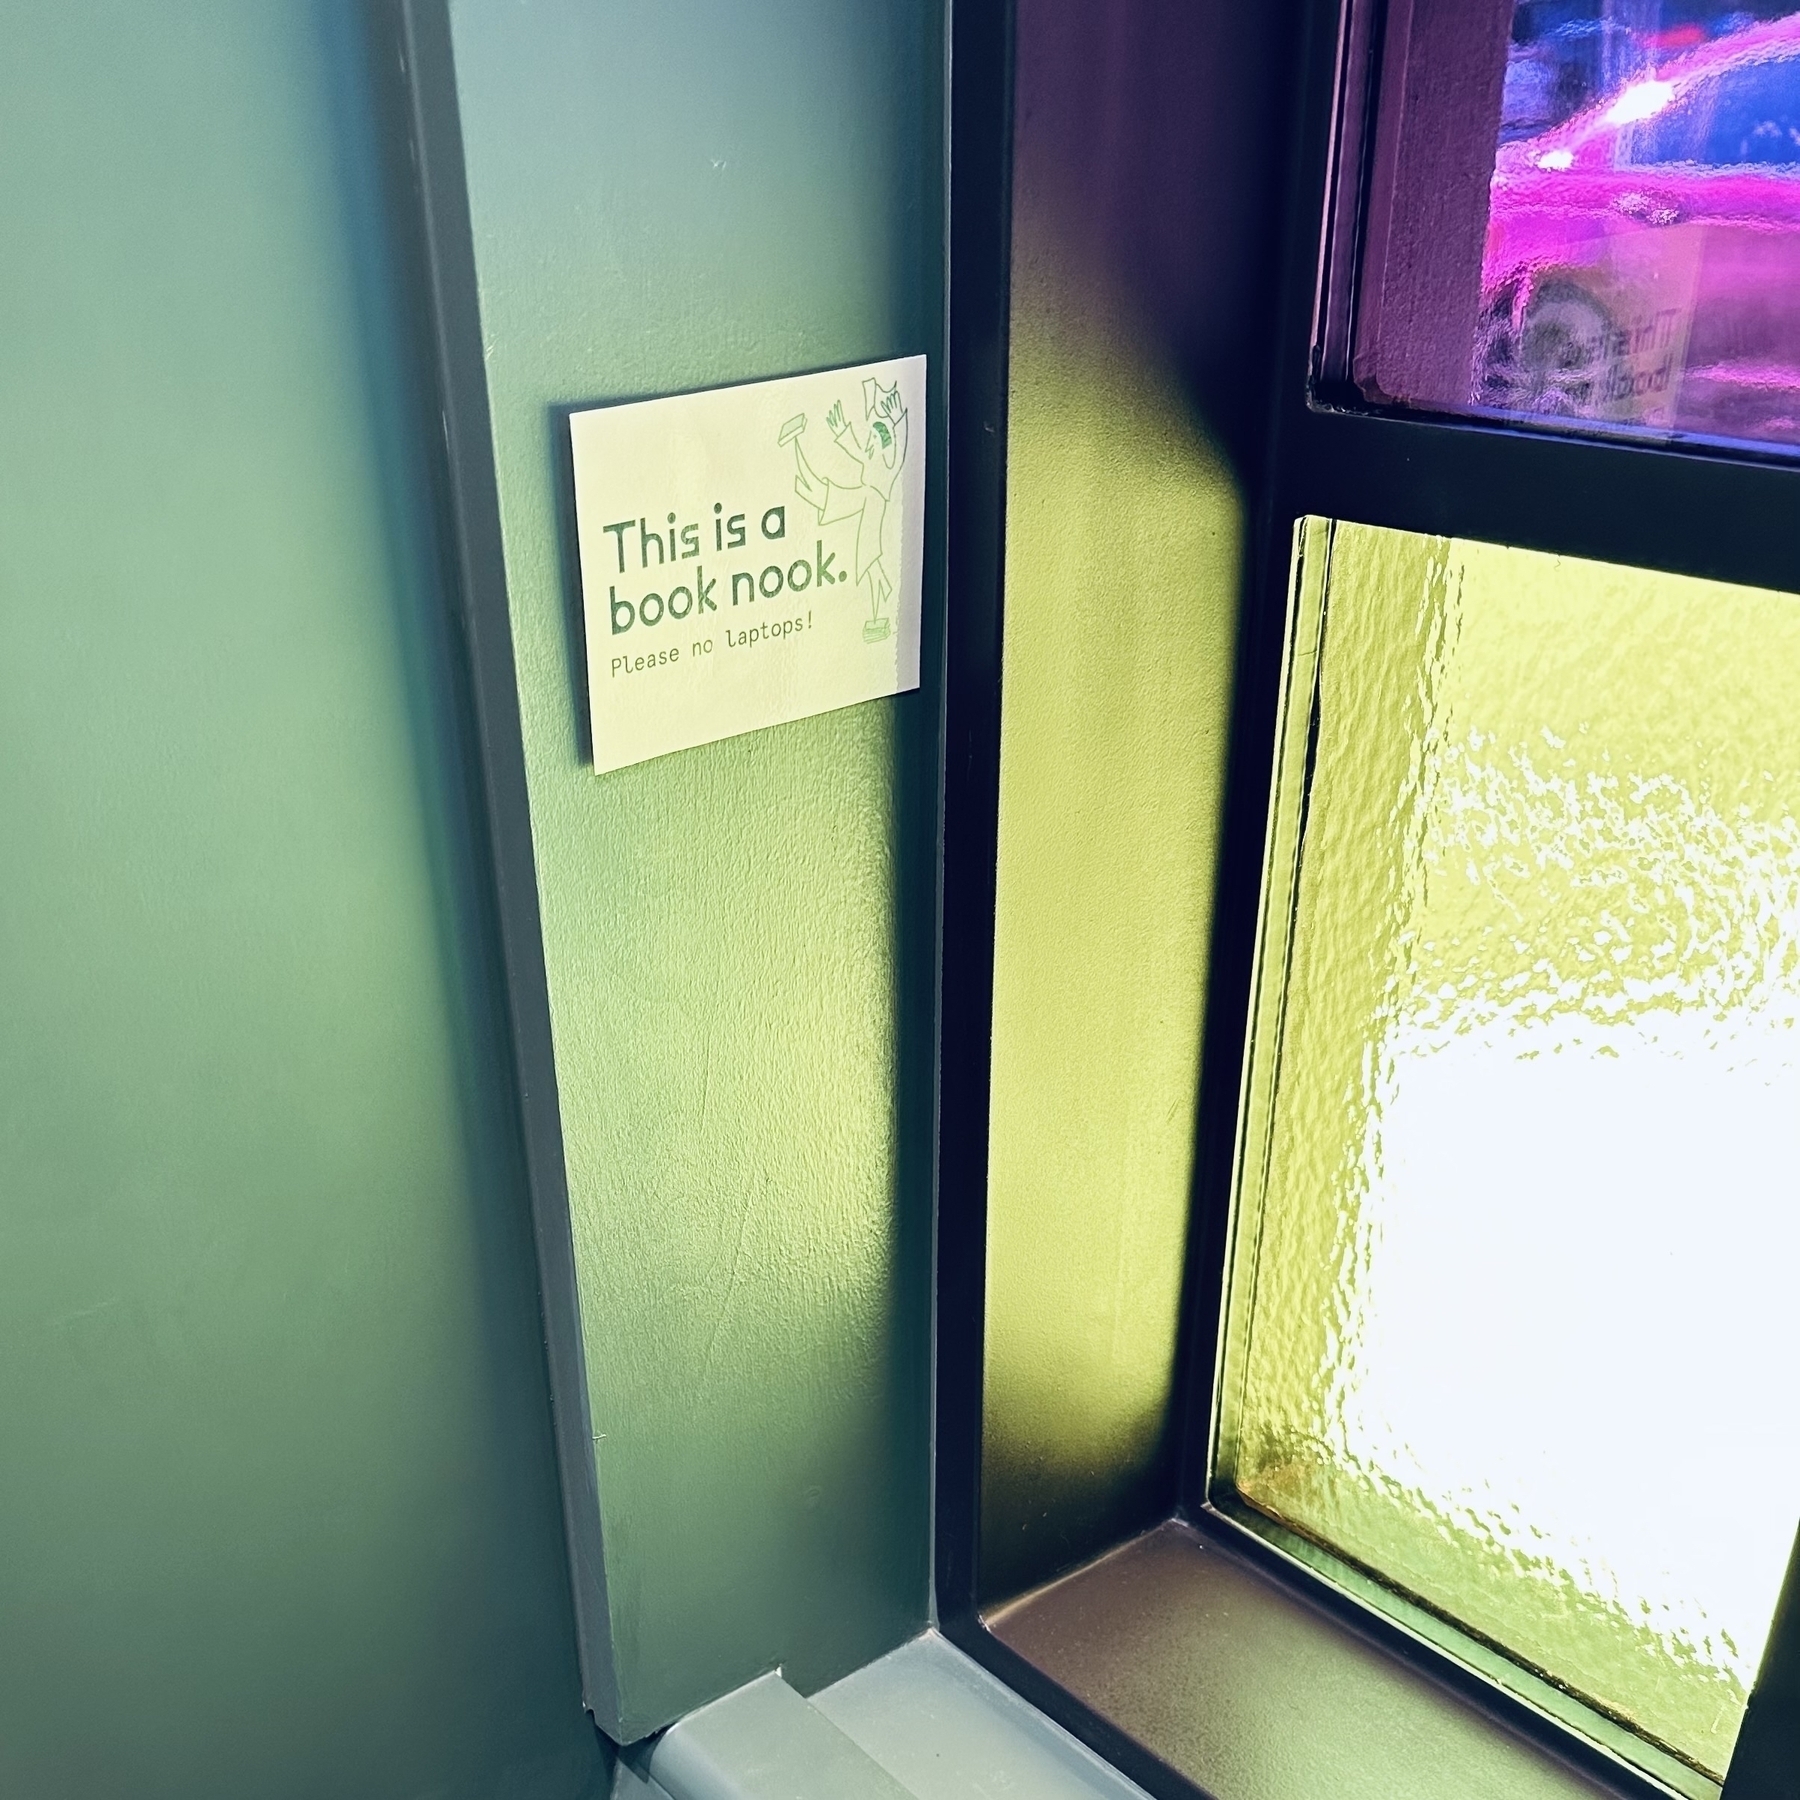 Seat by the window with a sign.